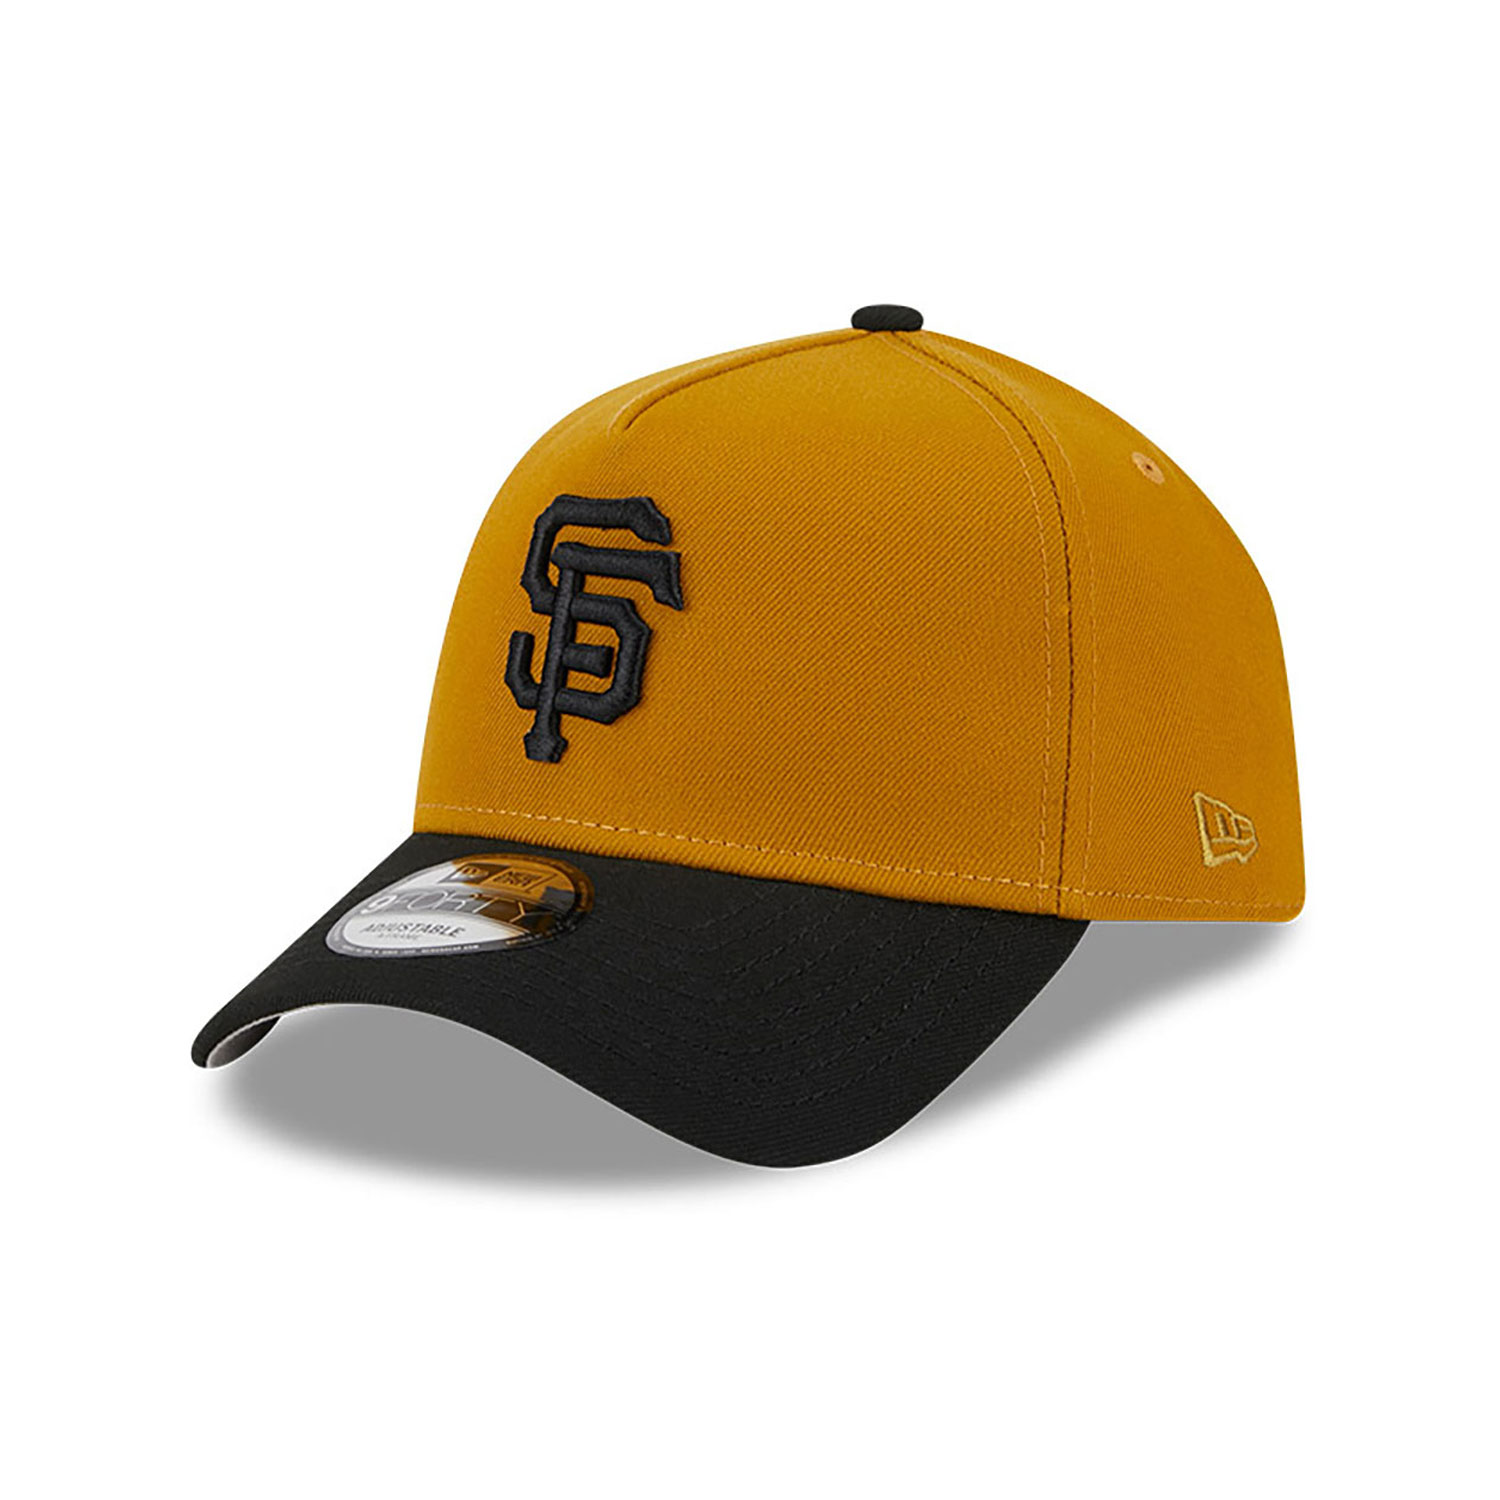 San Francisco Giants Rustic Fall Gold A-Frame 9FORTY Adjustable Cap